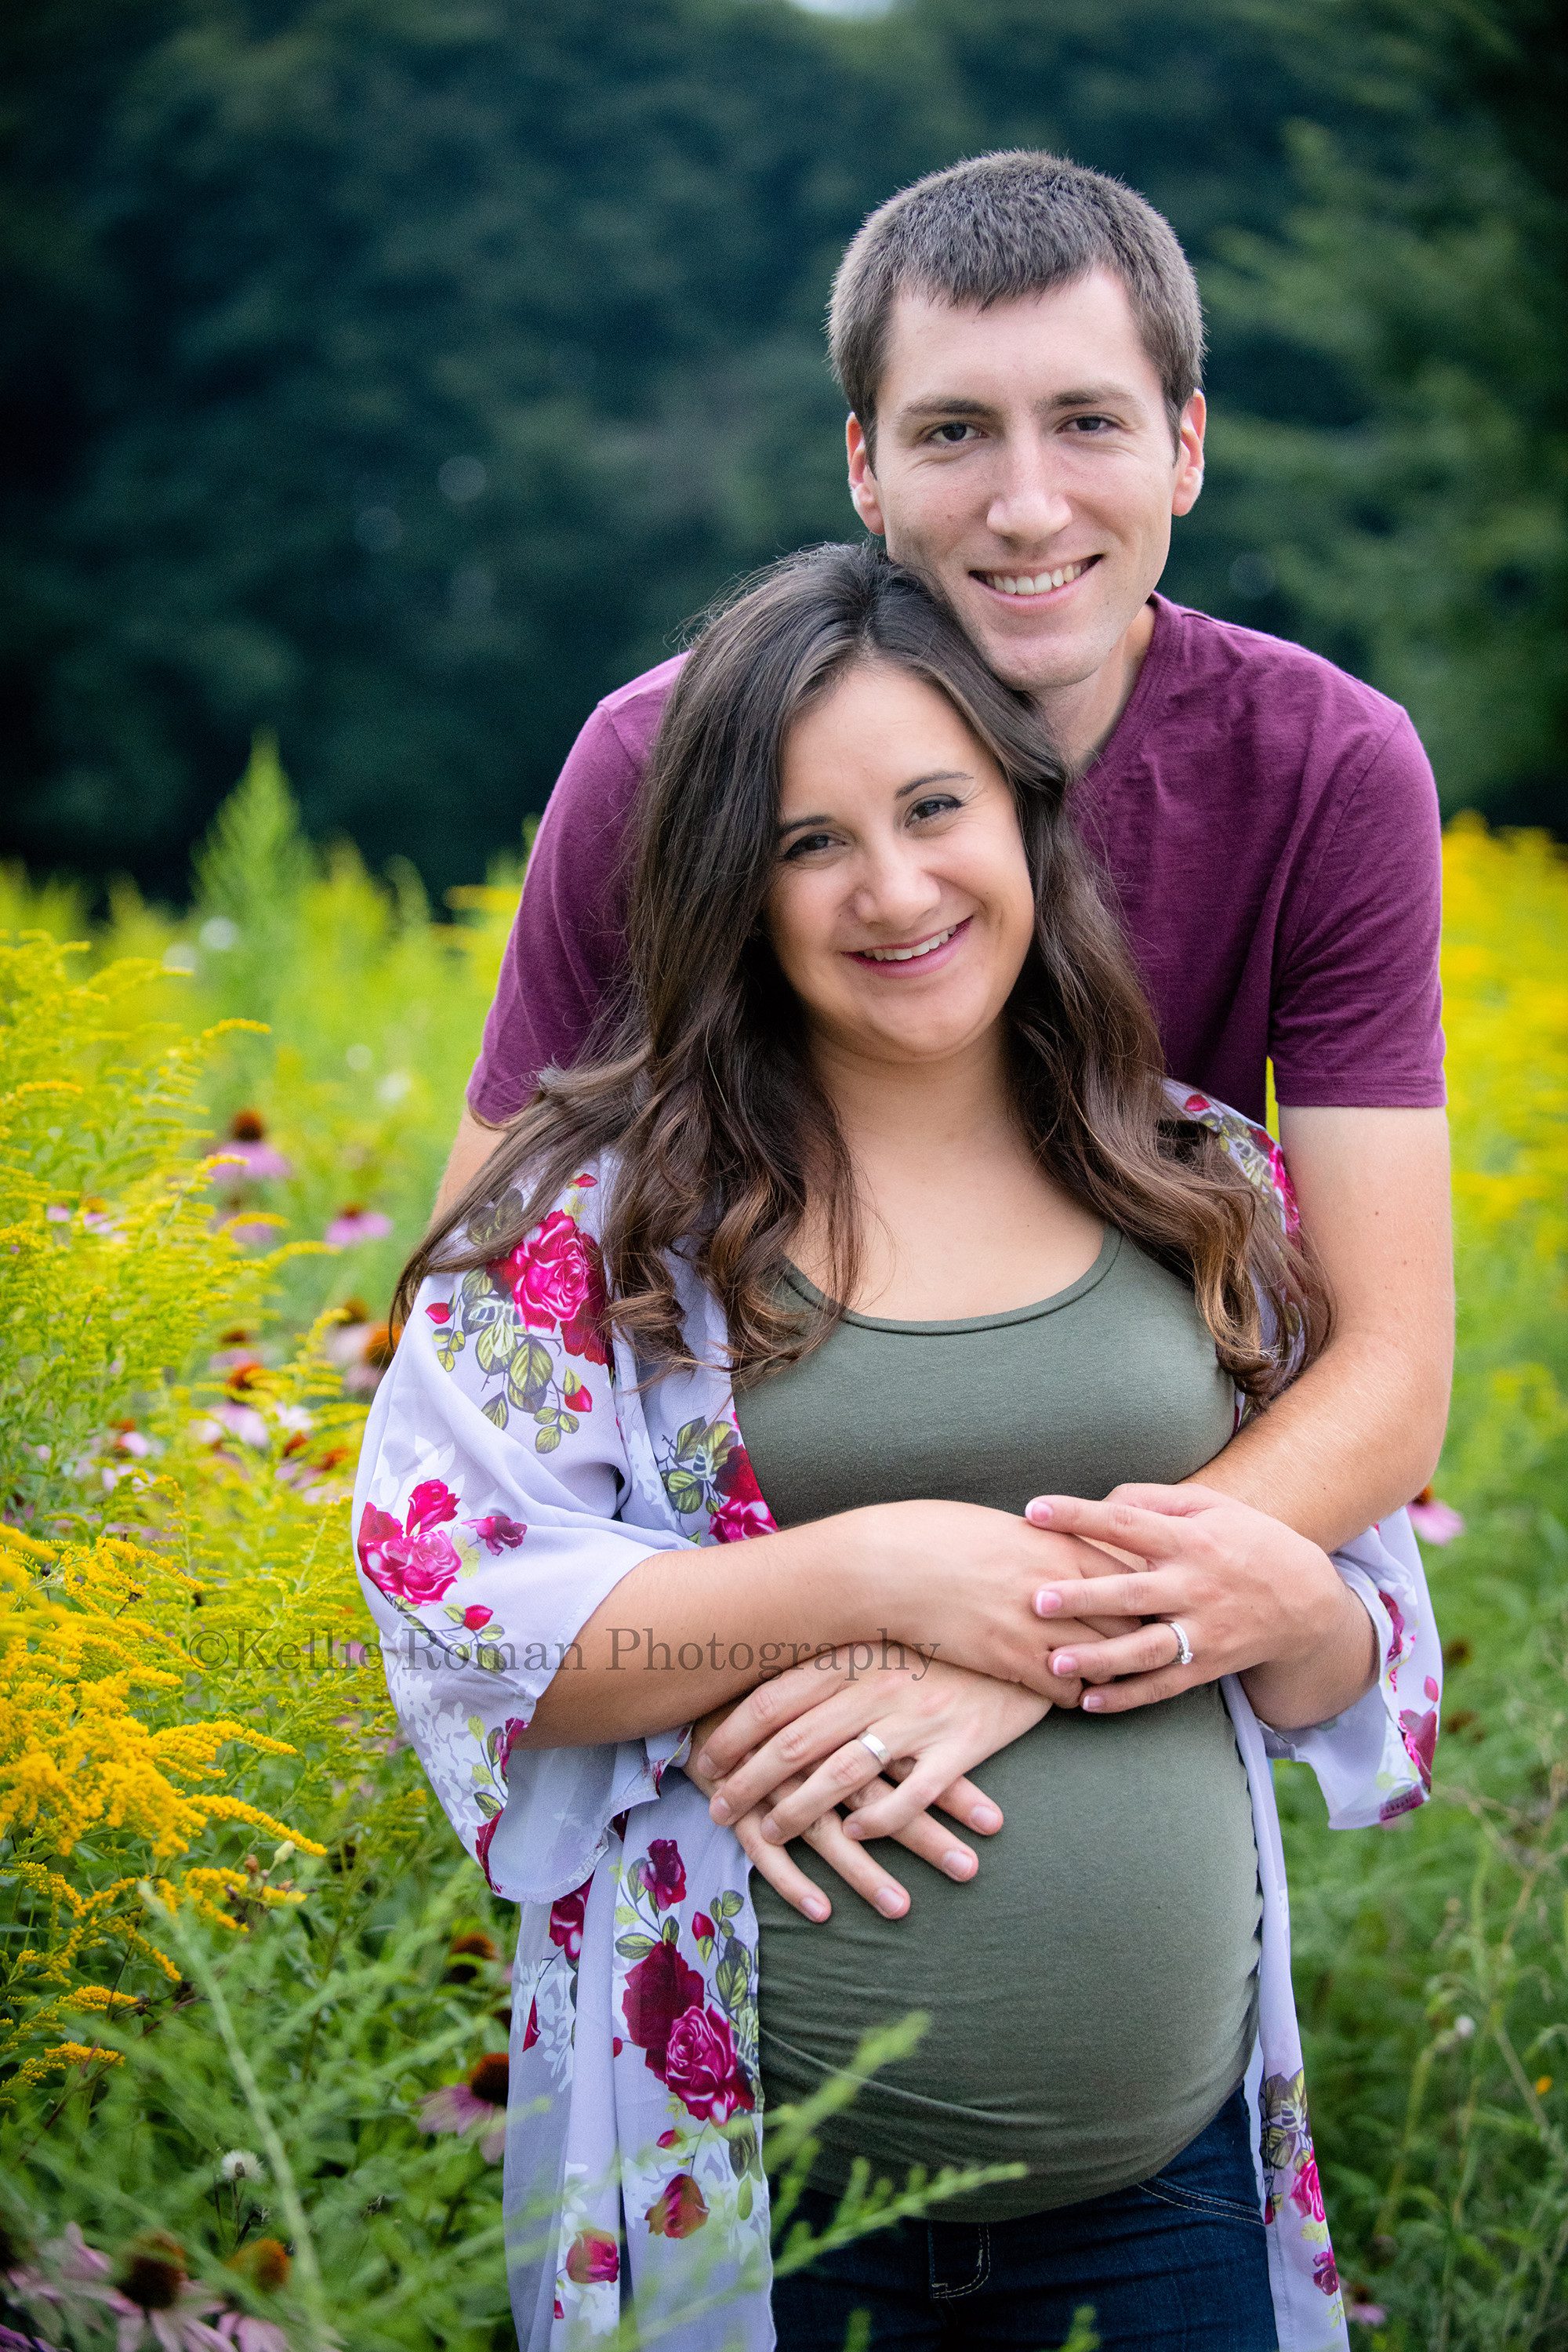 maternity gowns a couple in kenosha Wisconsin expecting their first child are standing in a field of yellow pink and green flowers they are looking at the camera smiling and they are wearing shades of green white and maroon with jeans